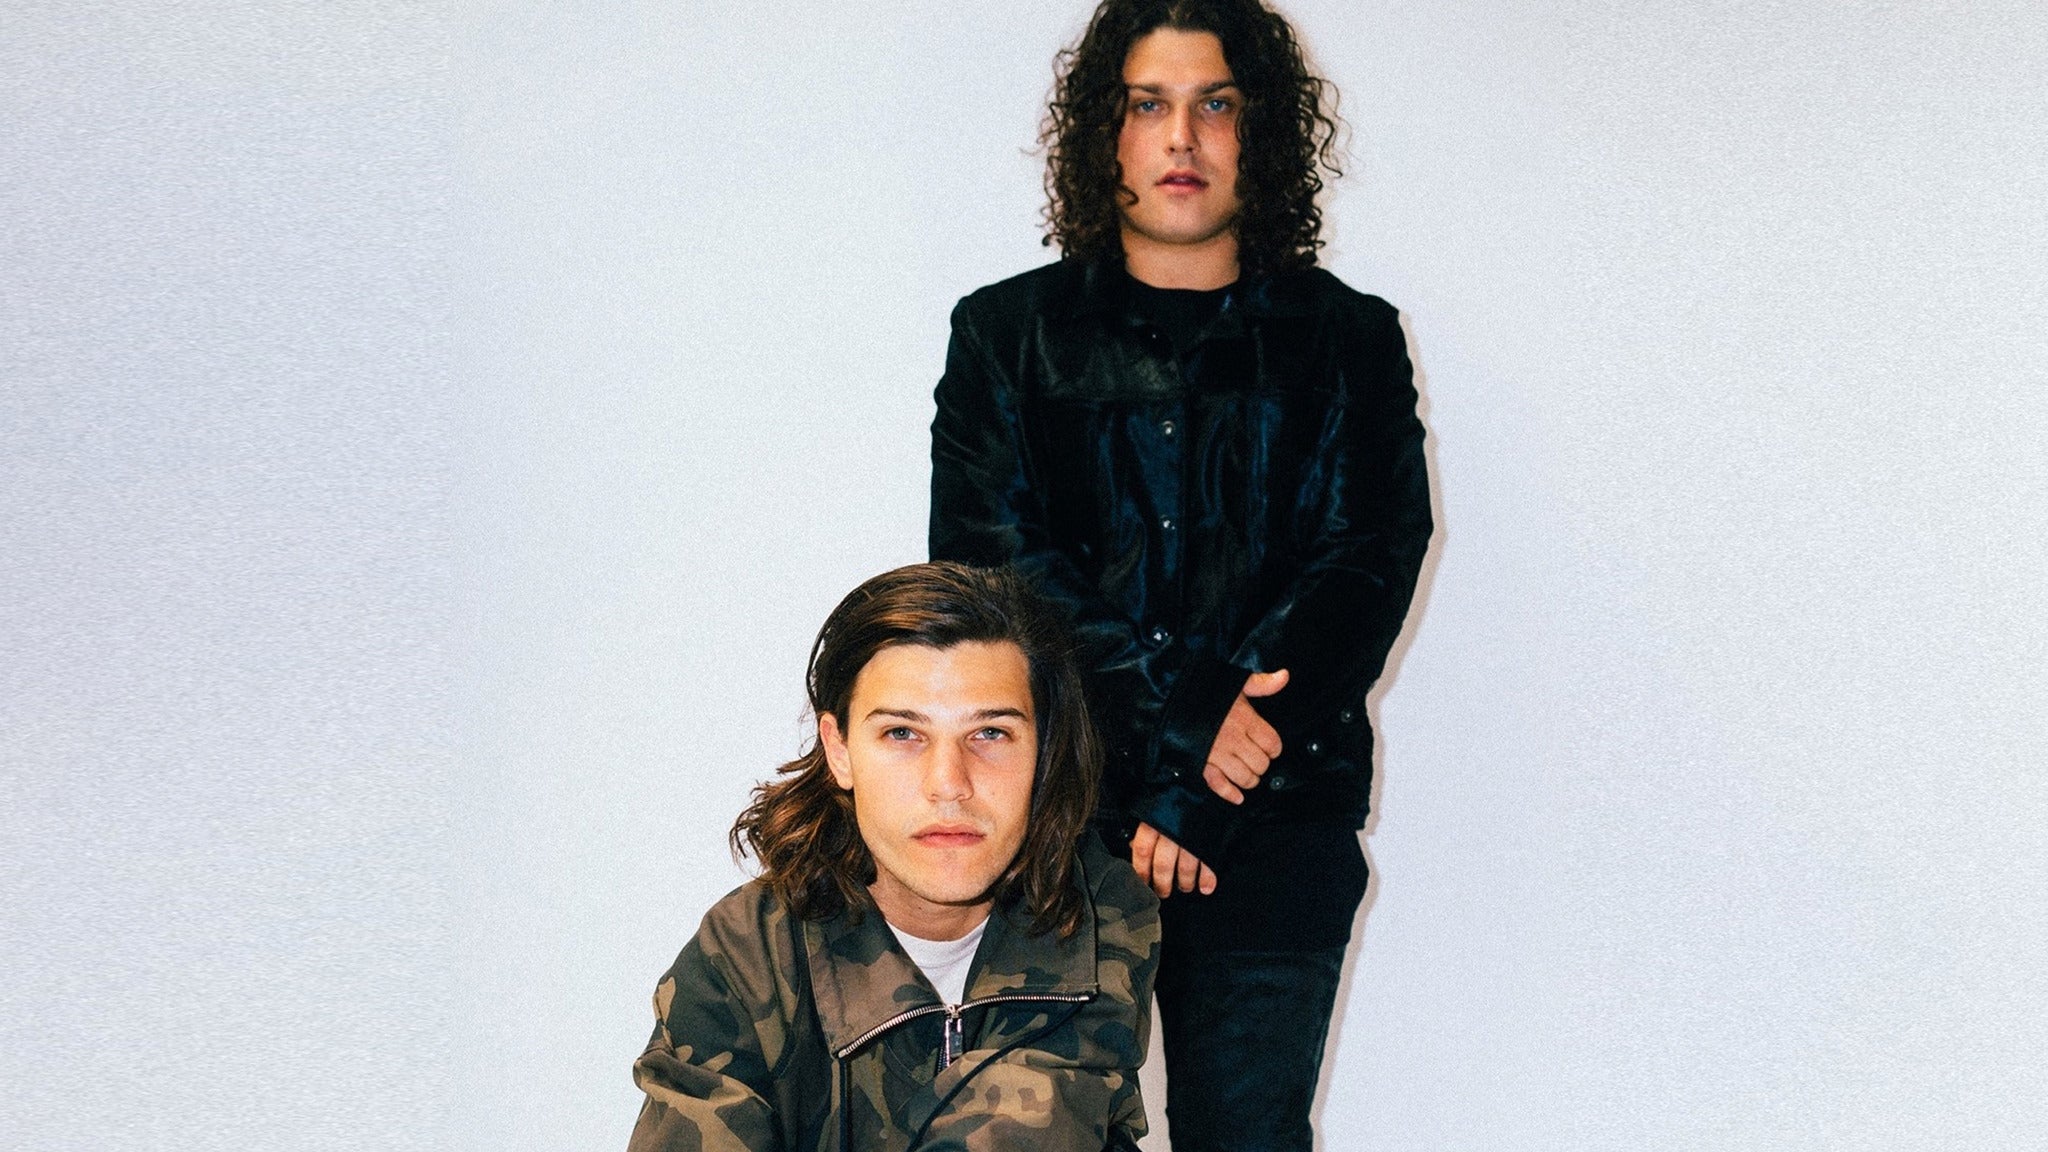 DVBBS presale code for advance tickets in Fort Worth